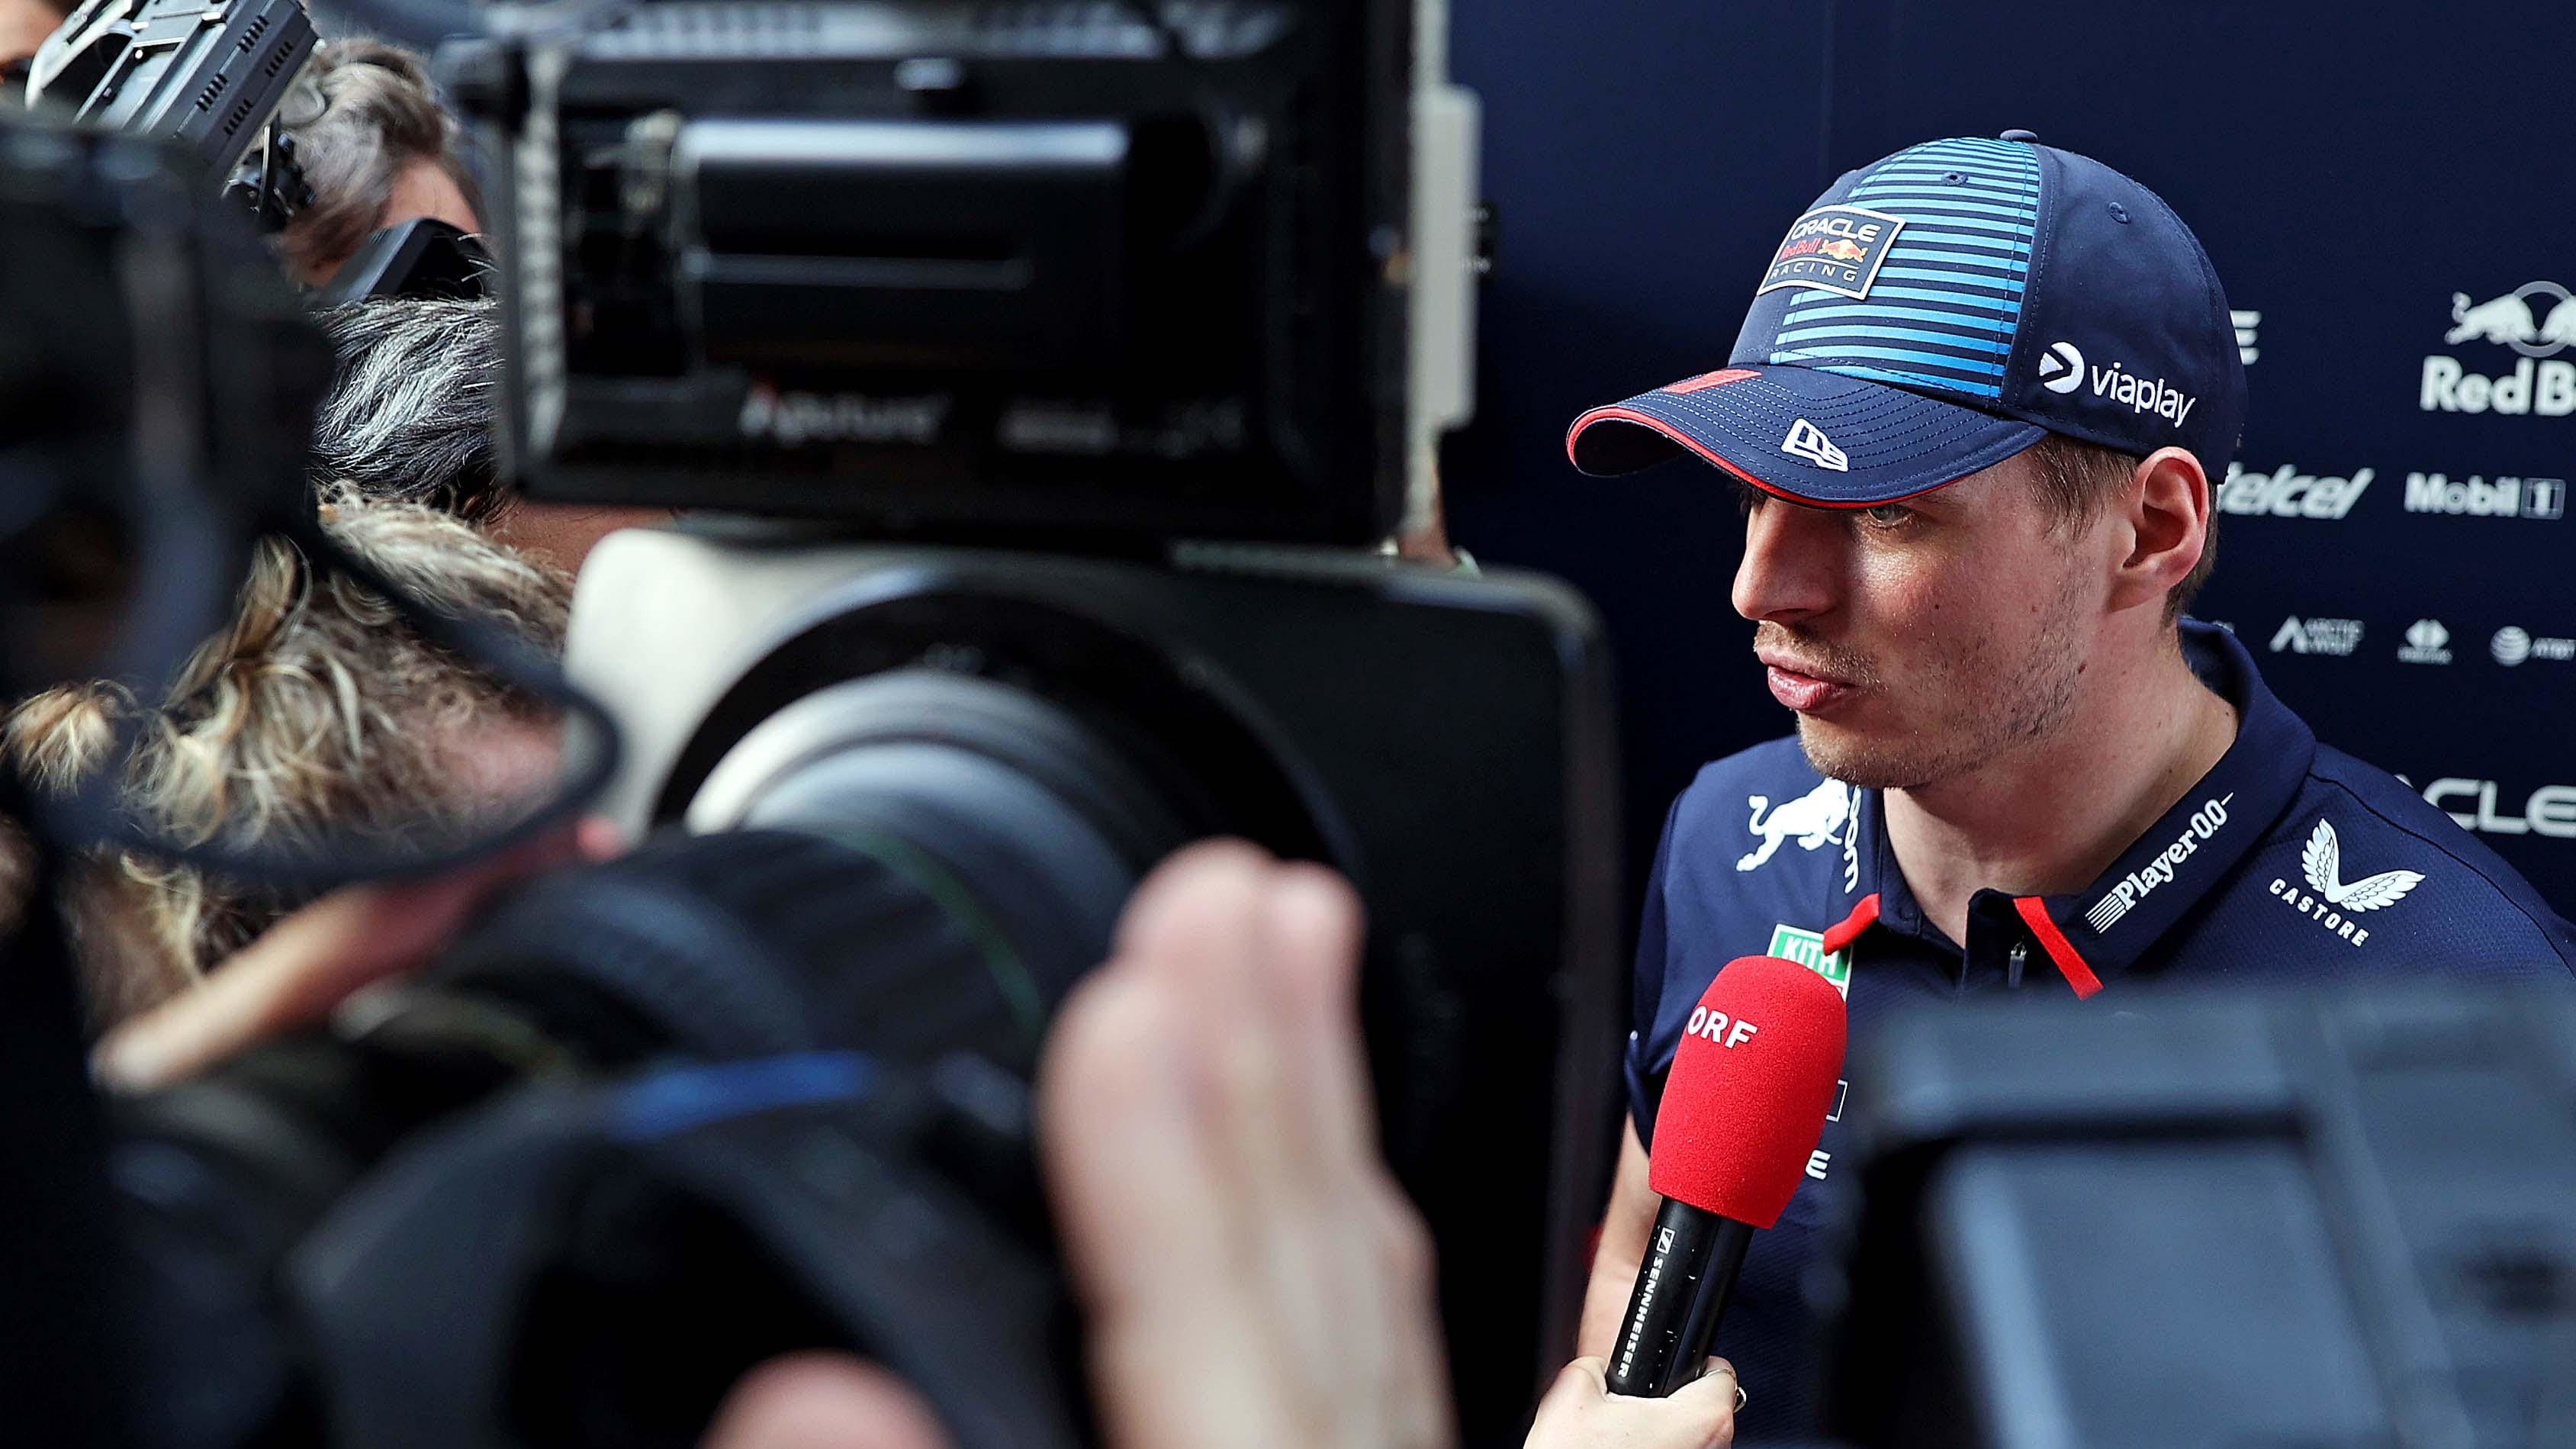 Red Bull F1 News: Max Verstappen Comments on Adrian Newey Exit - 'Incredibly Important for Success'